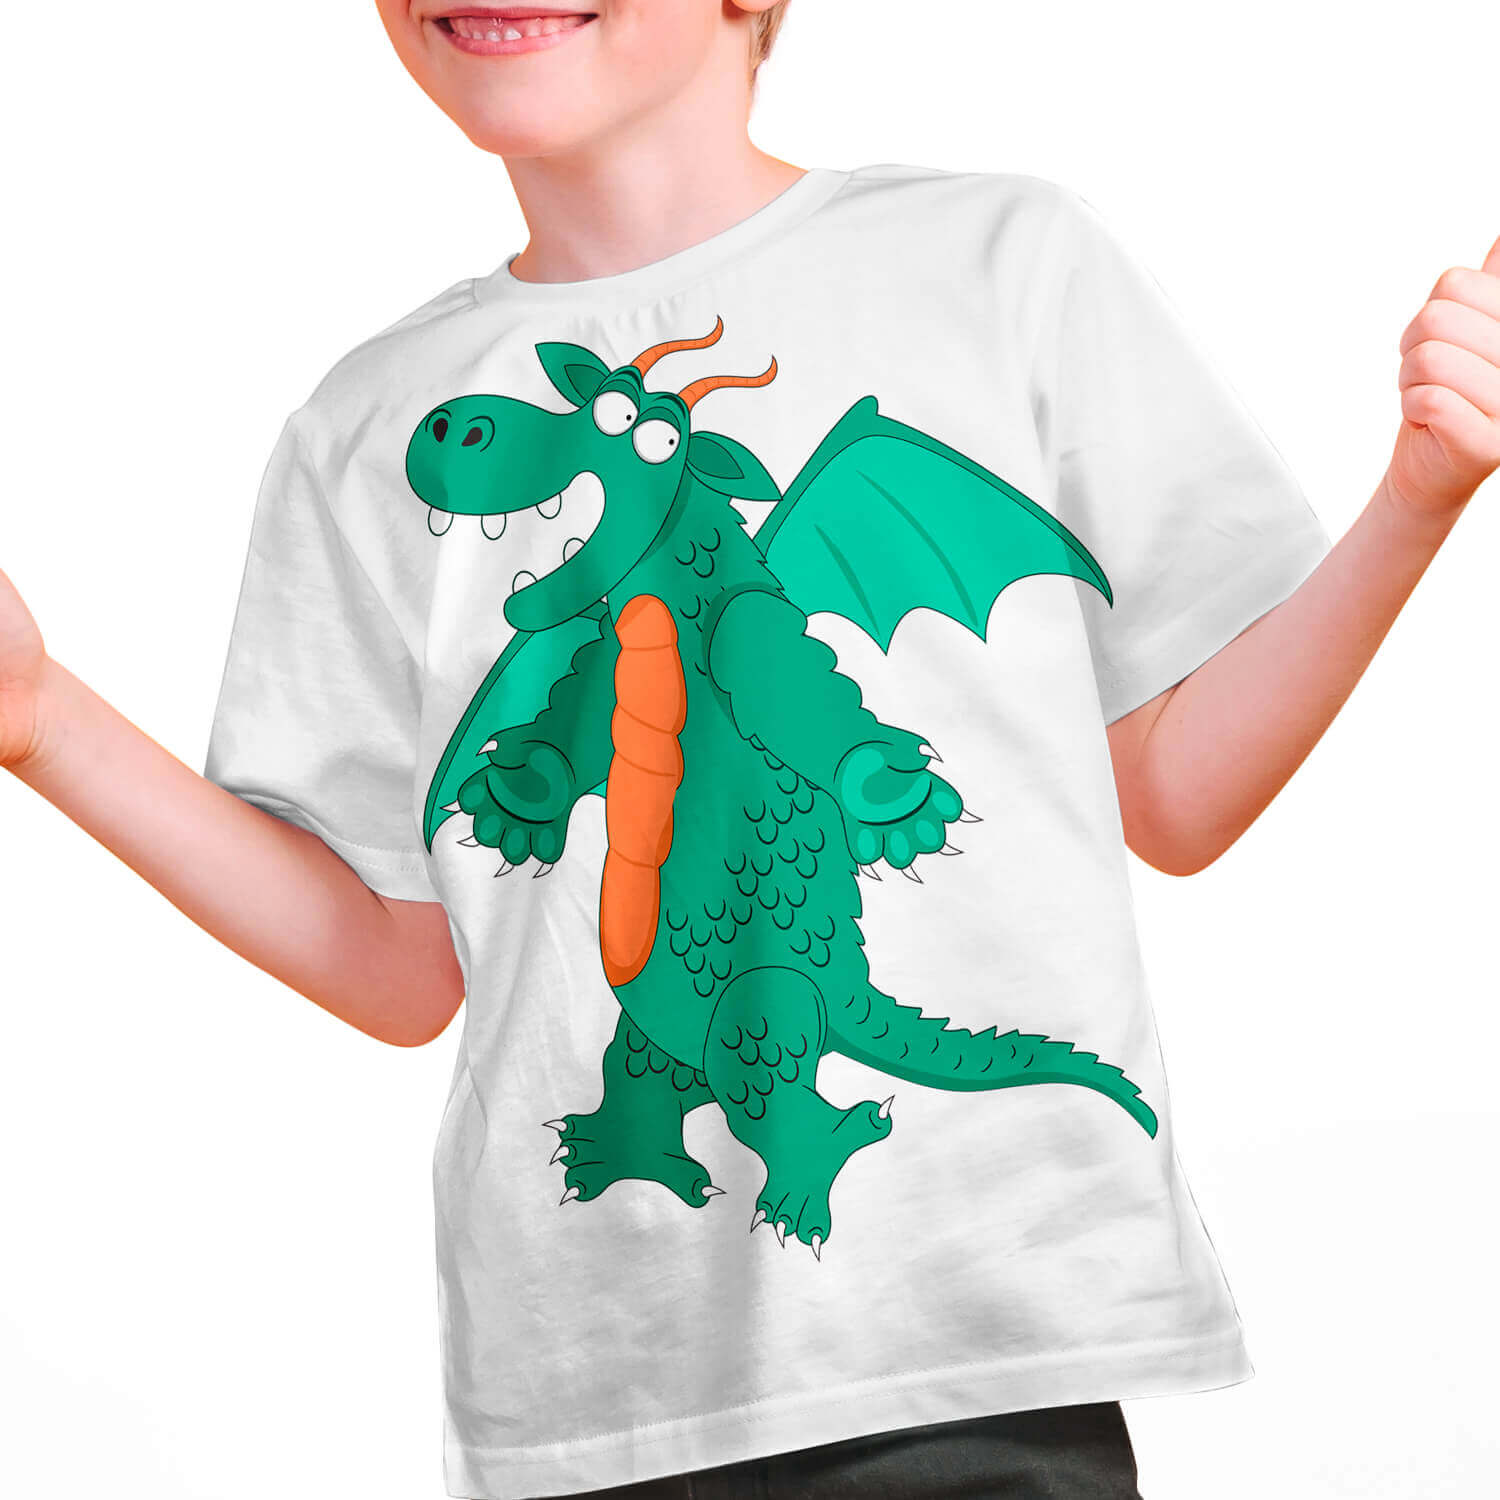 The boy's white t-shirt features a small, cheerful dragon.